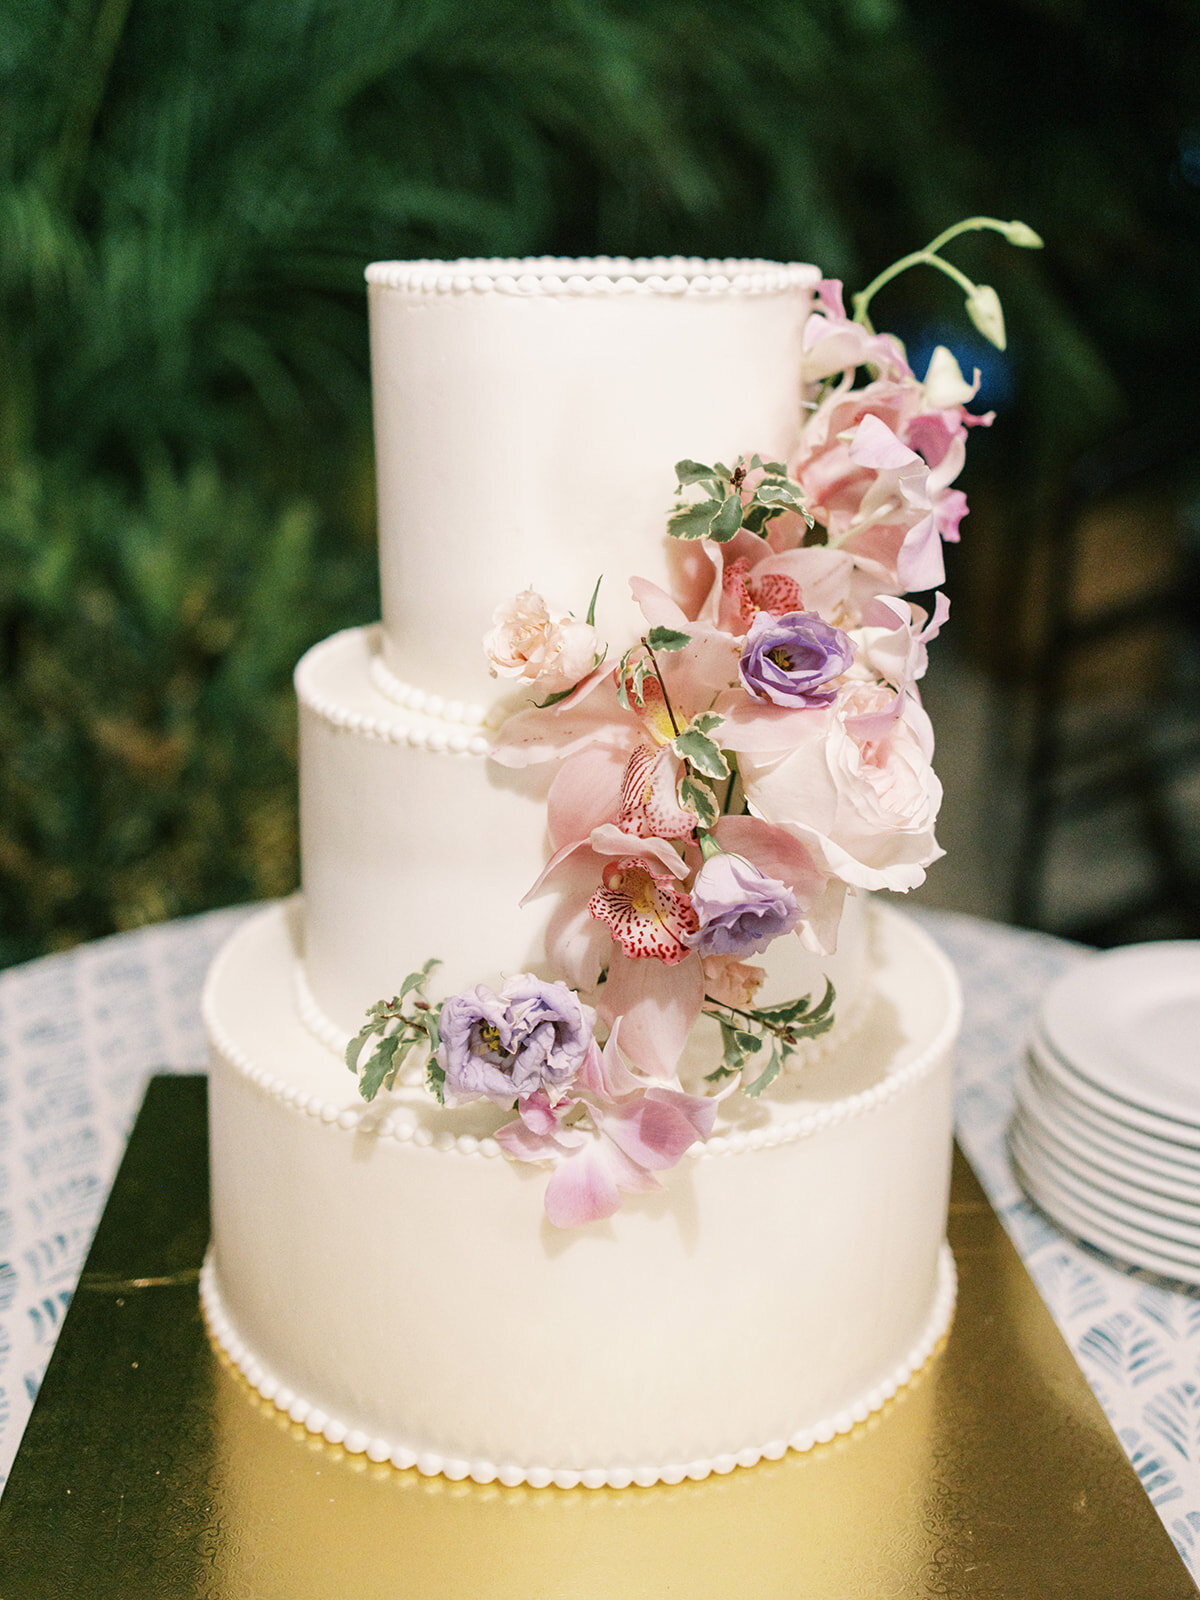 Lush tropical cake flowers for private estate beach wedding. Destination wedding florals in orange, pink, dusty blue, lavender, peach, and blush in Exuma, Bahamas. Floral Design by Rosemary & Finch Floral Design.